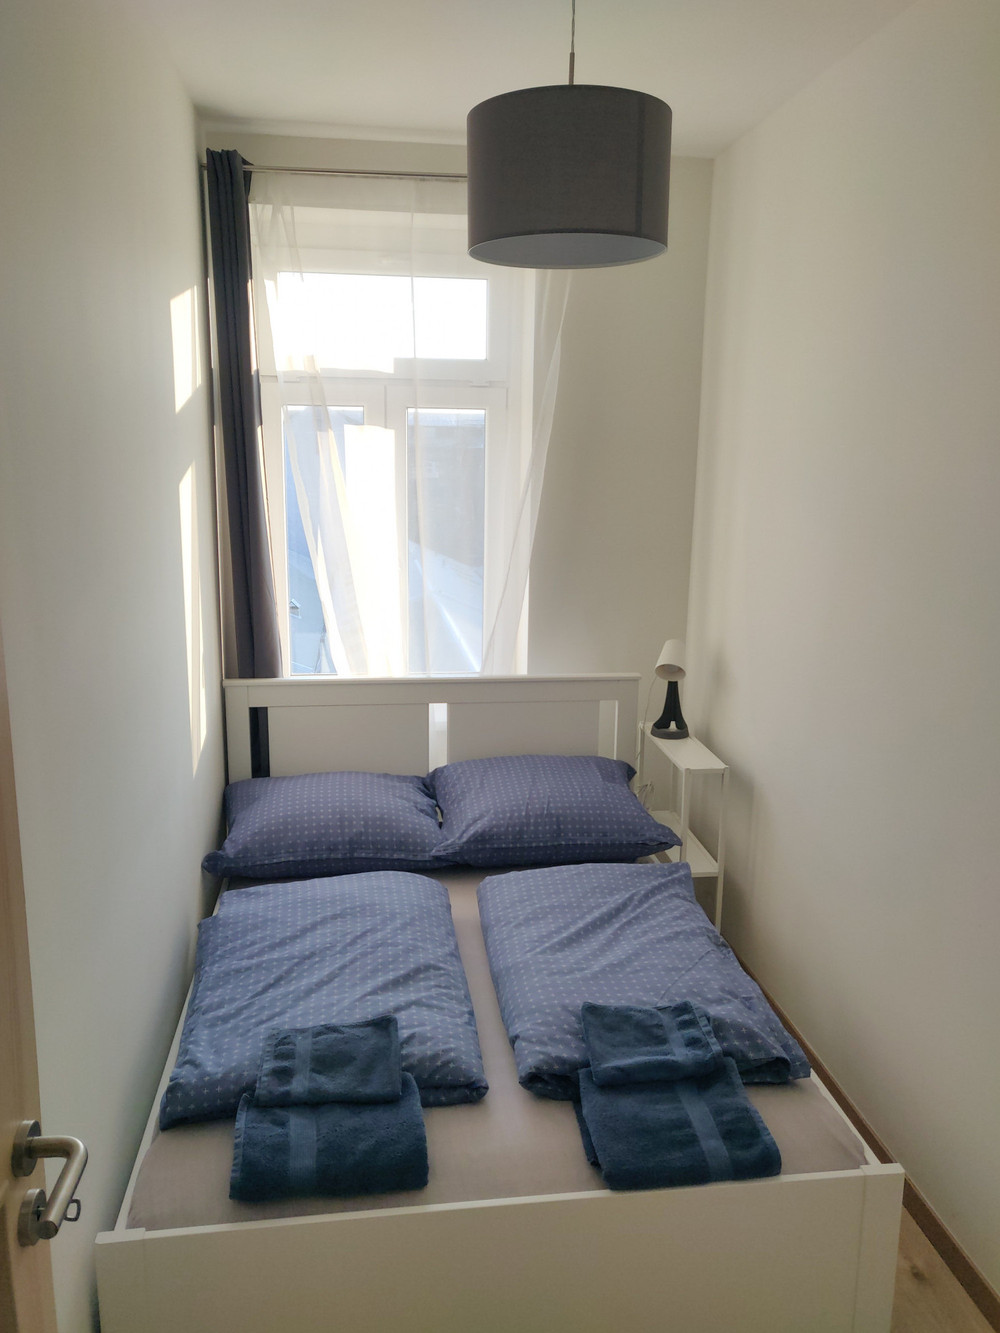 EastEnd brand new flat for 4 guests